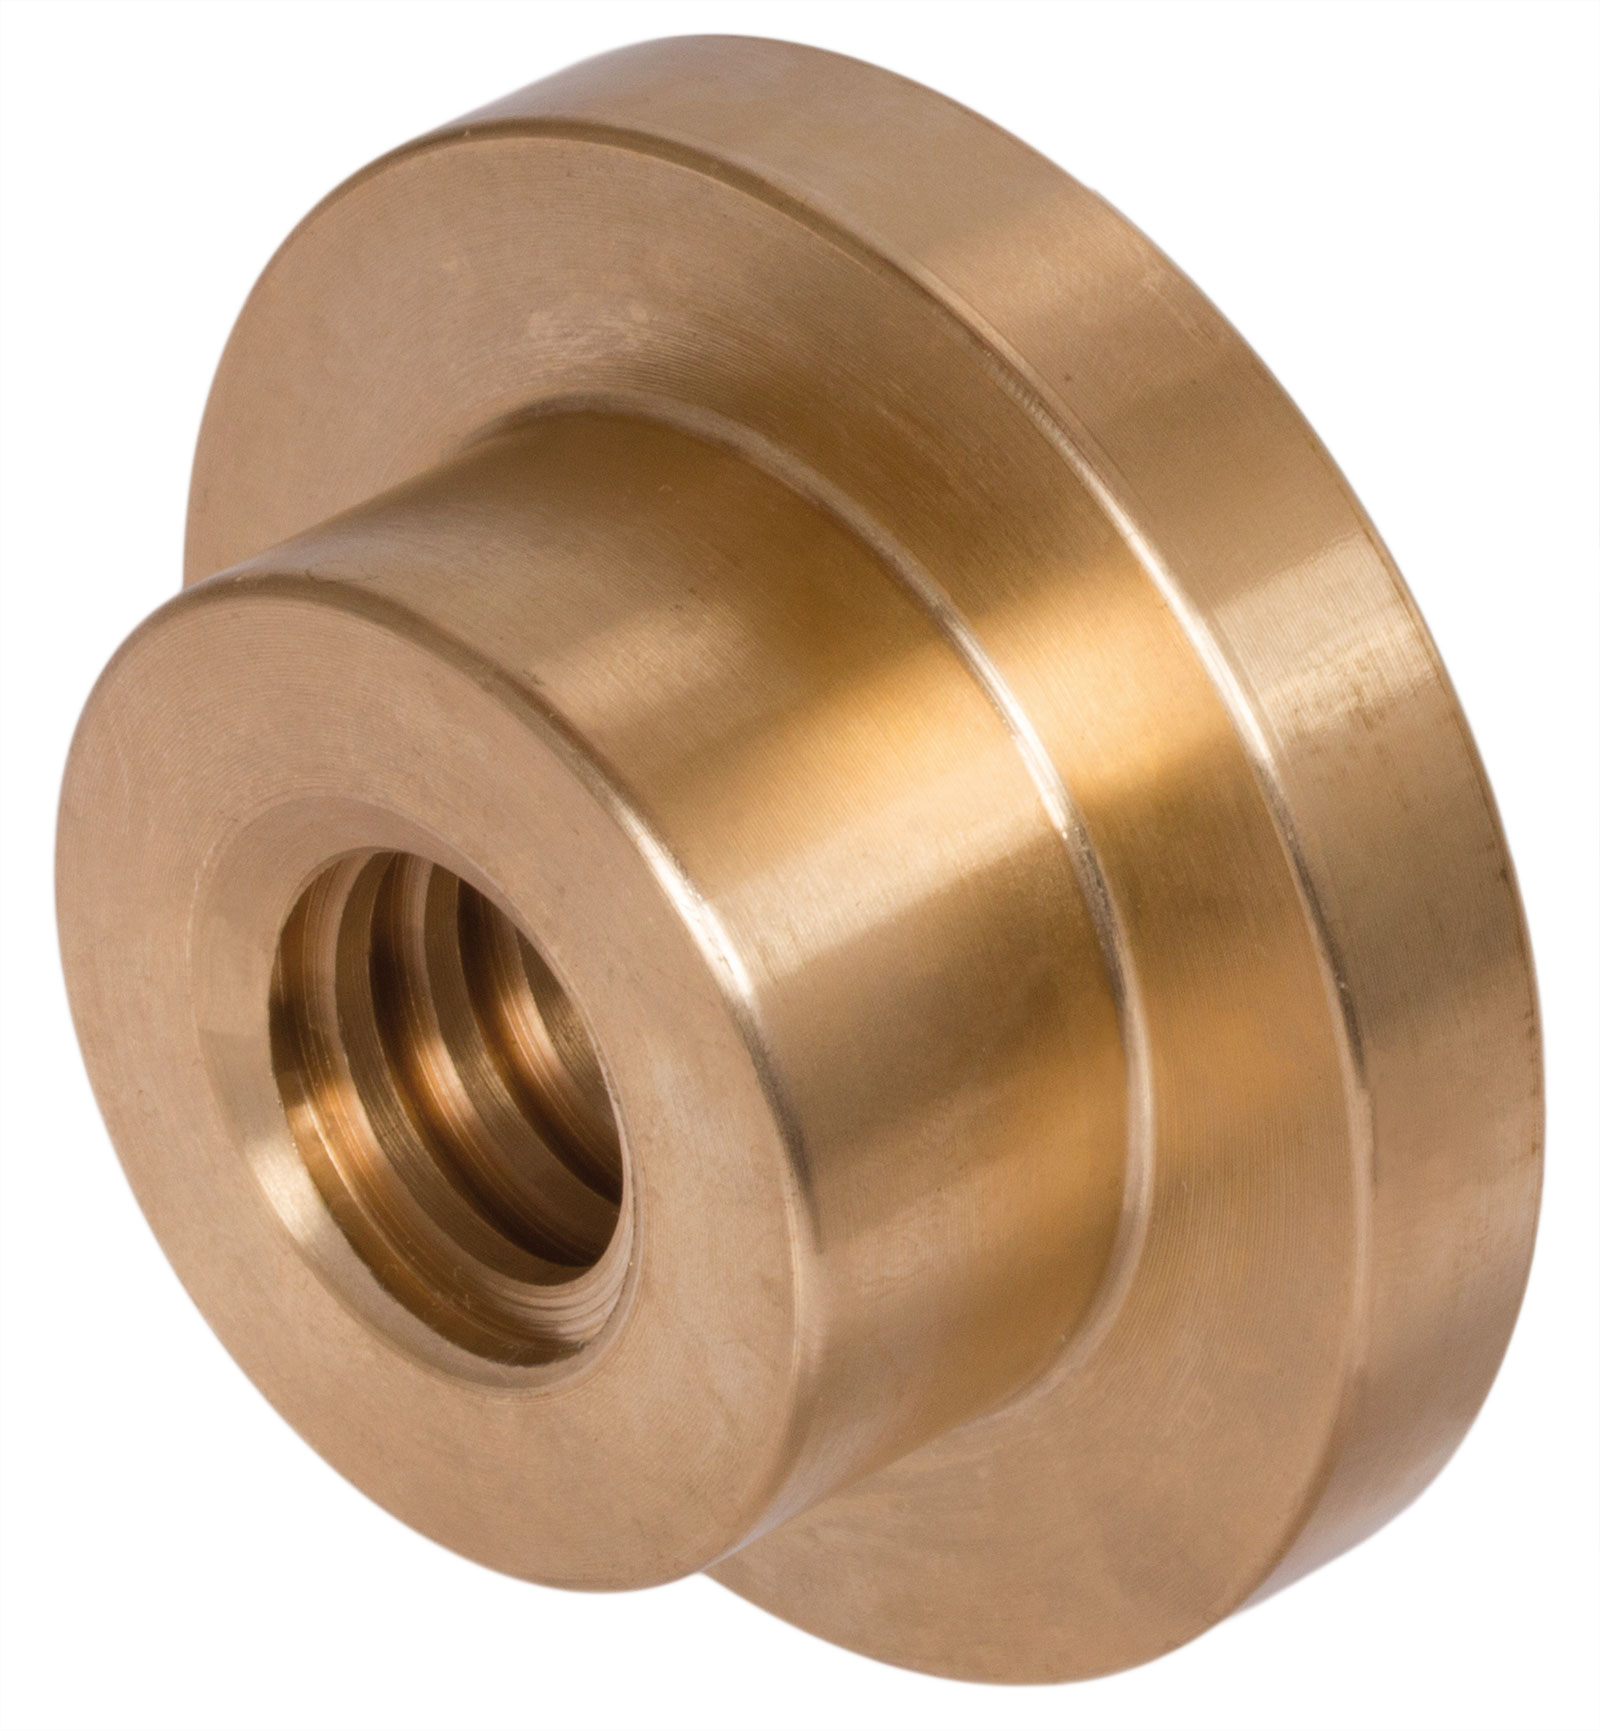 Details about   Tr14x3-LH Flanged Bronze Trapezoidal Nut 14 mm Spindle 3 mm Pitch Left Handed 